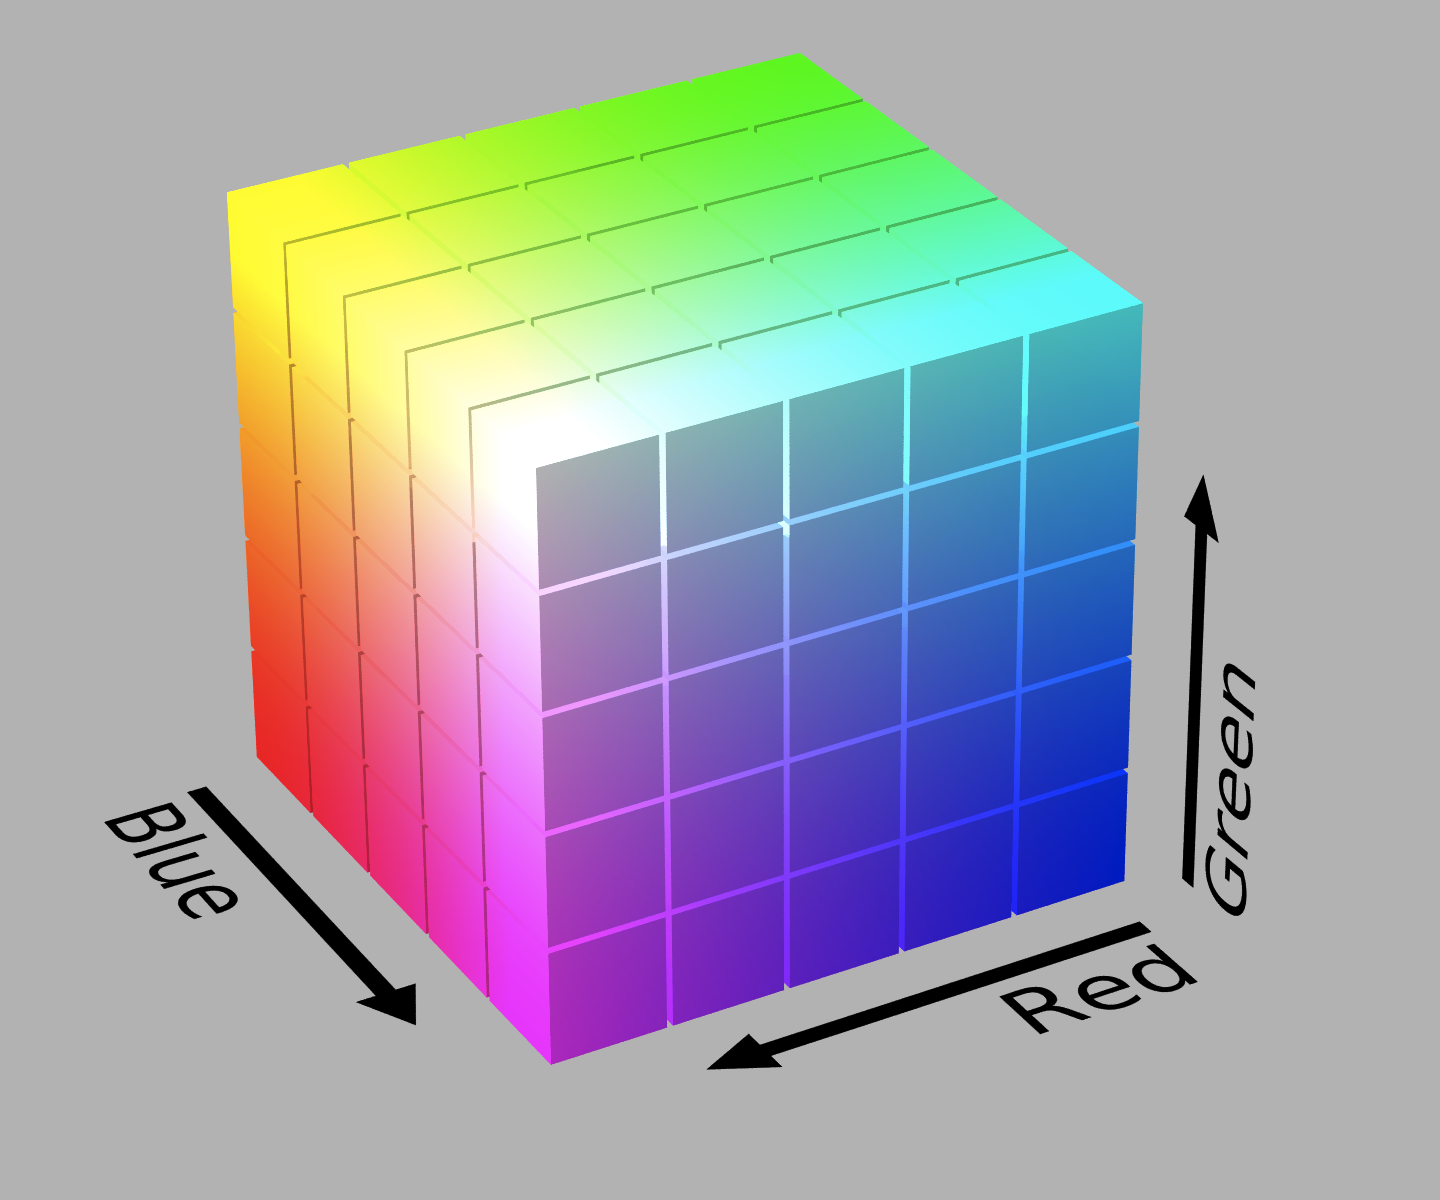 Three-dimensional visualization of the RGB colorspace. Image courtesy of SharkD on Wikimedia Commons.